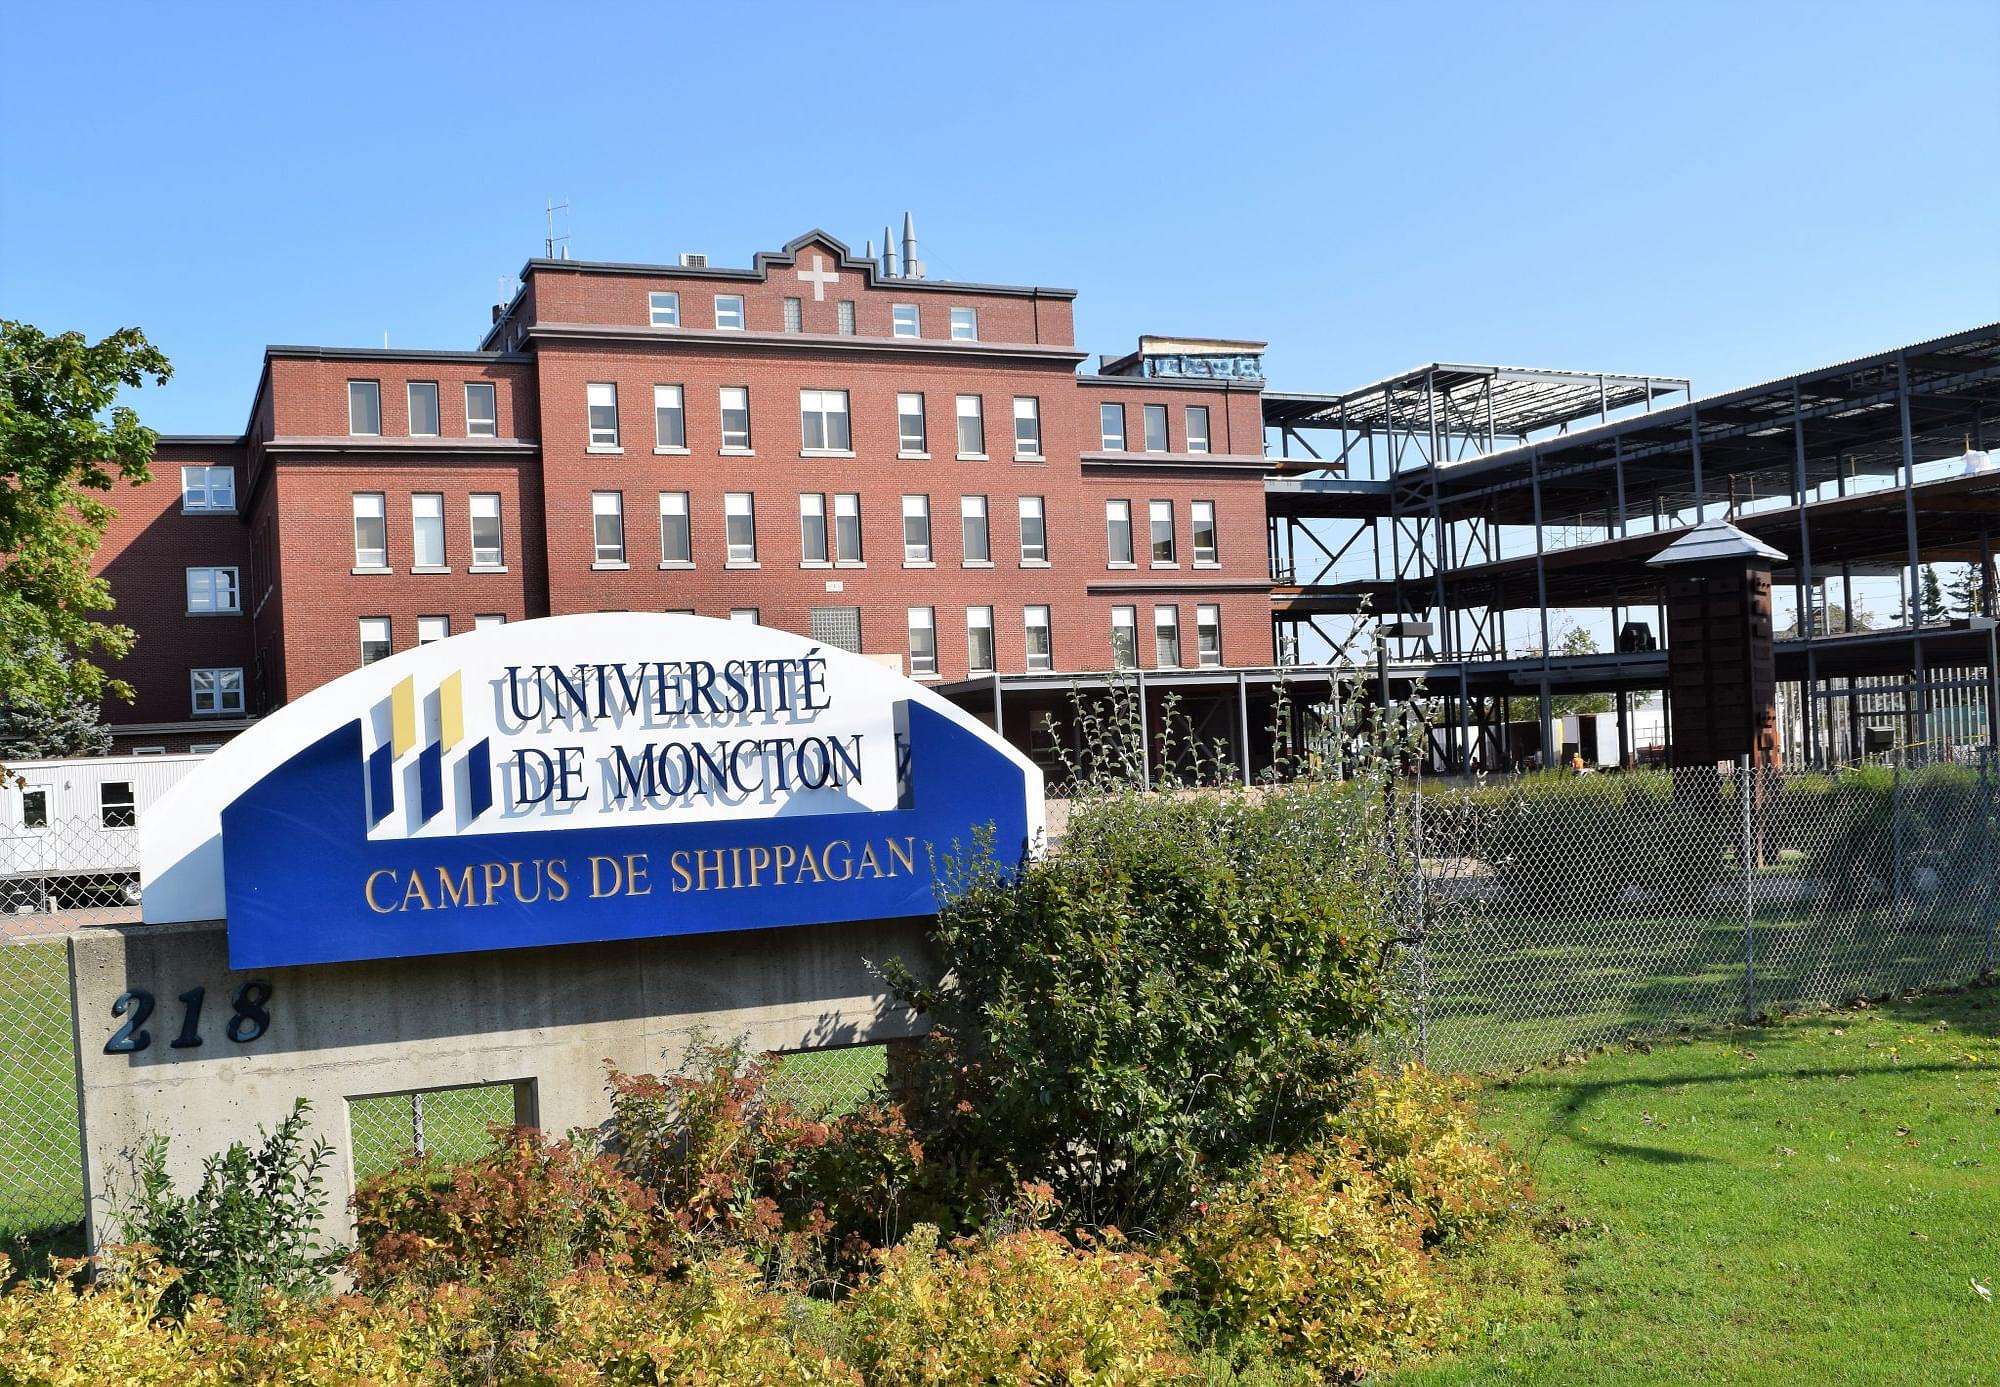 University of Moncton, Shippagan, Canada- Rankings, Campus, Accommodation,  Programs, Admissions, Cost of Attendance and Scholarships